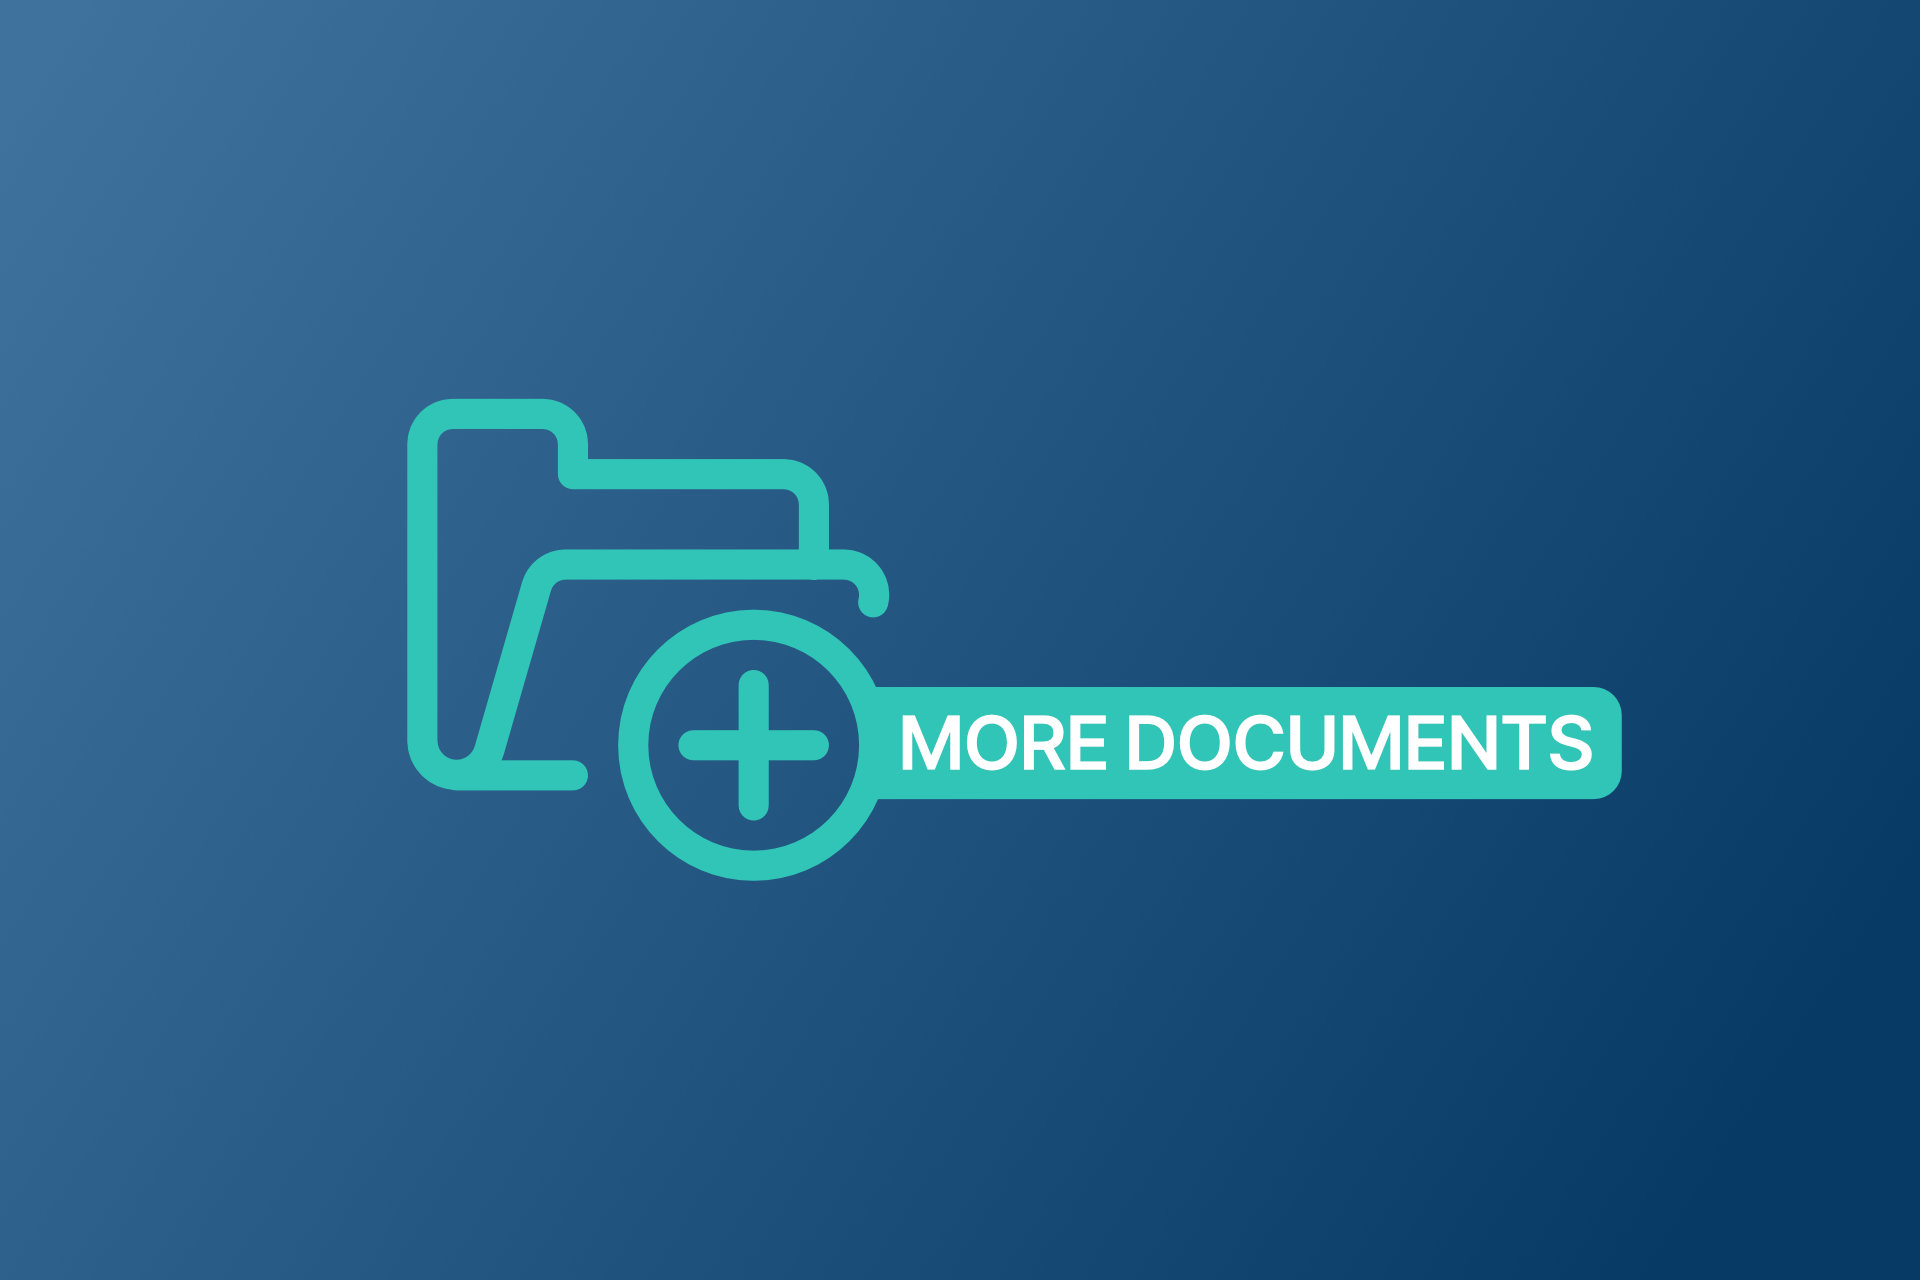 Folder icon with a label saying more documents